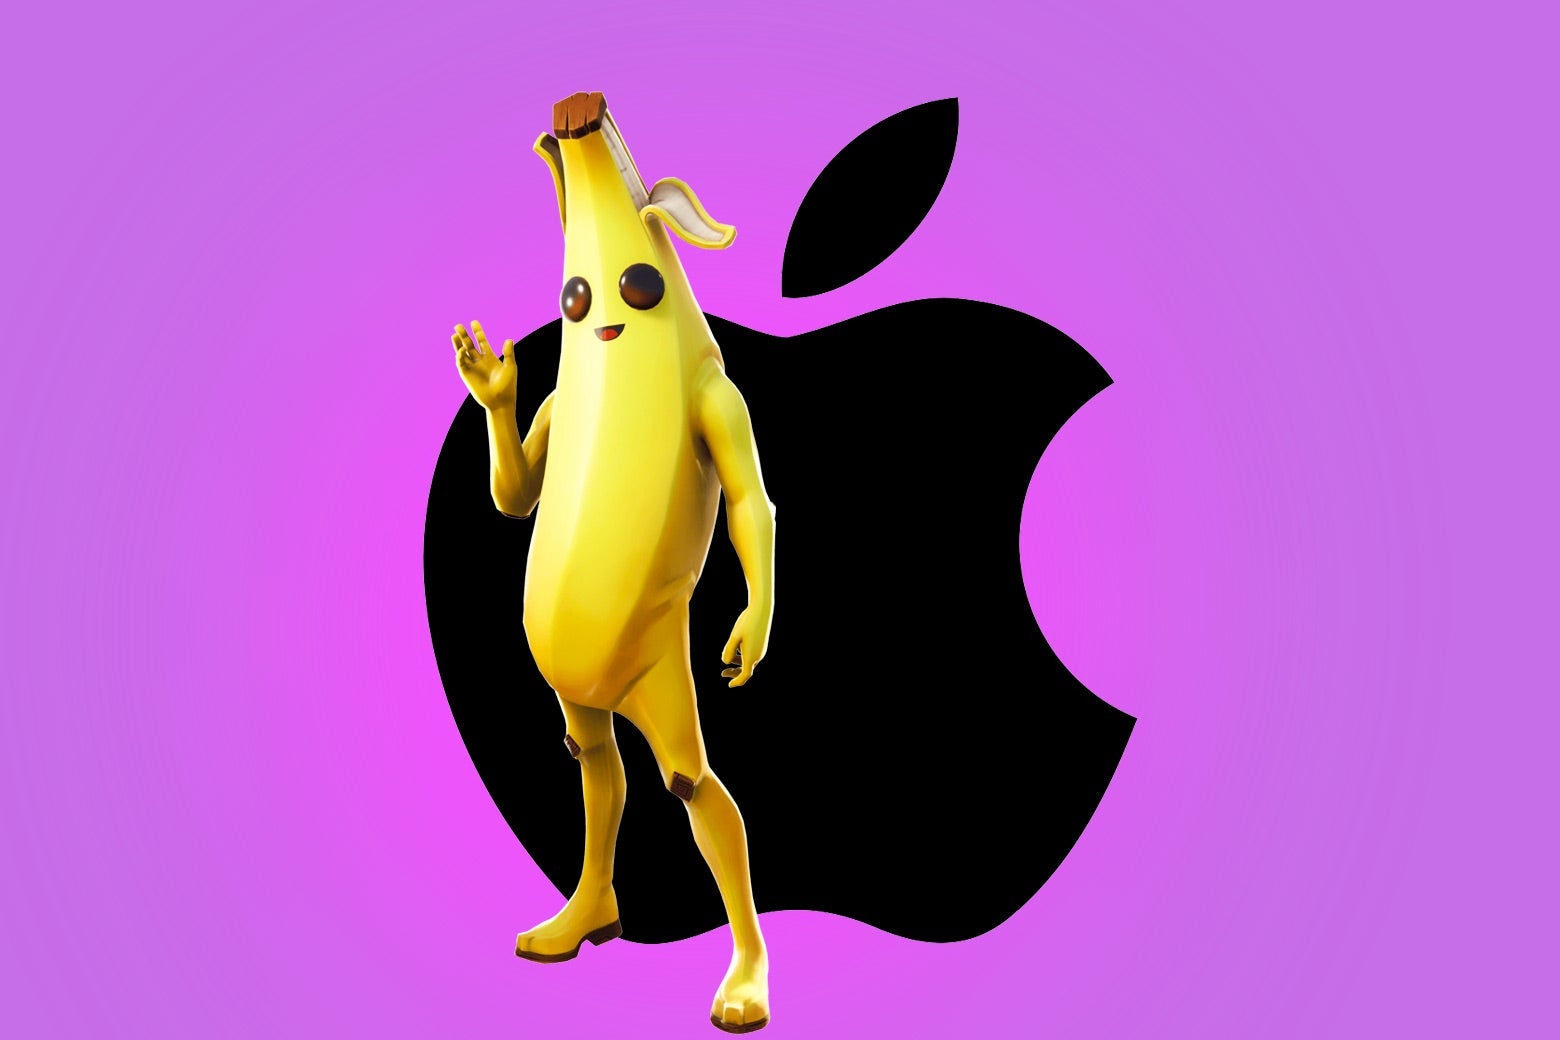 The Fortnite character Peely and the Apple logo.